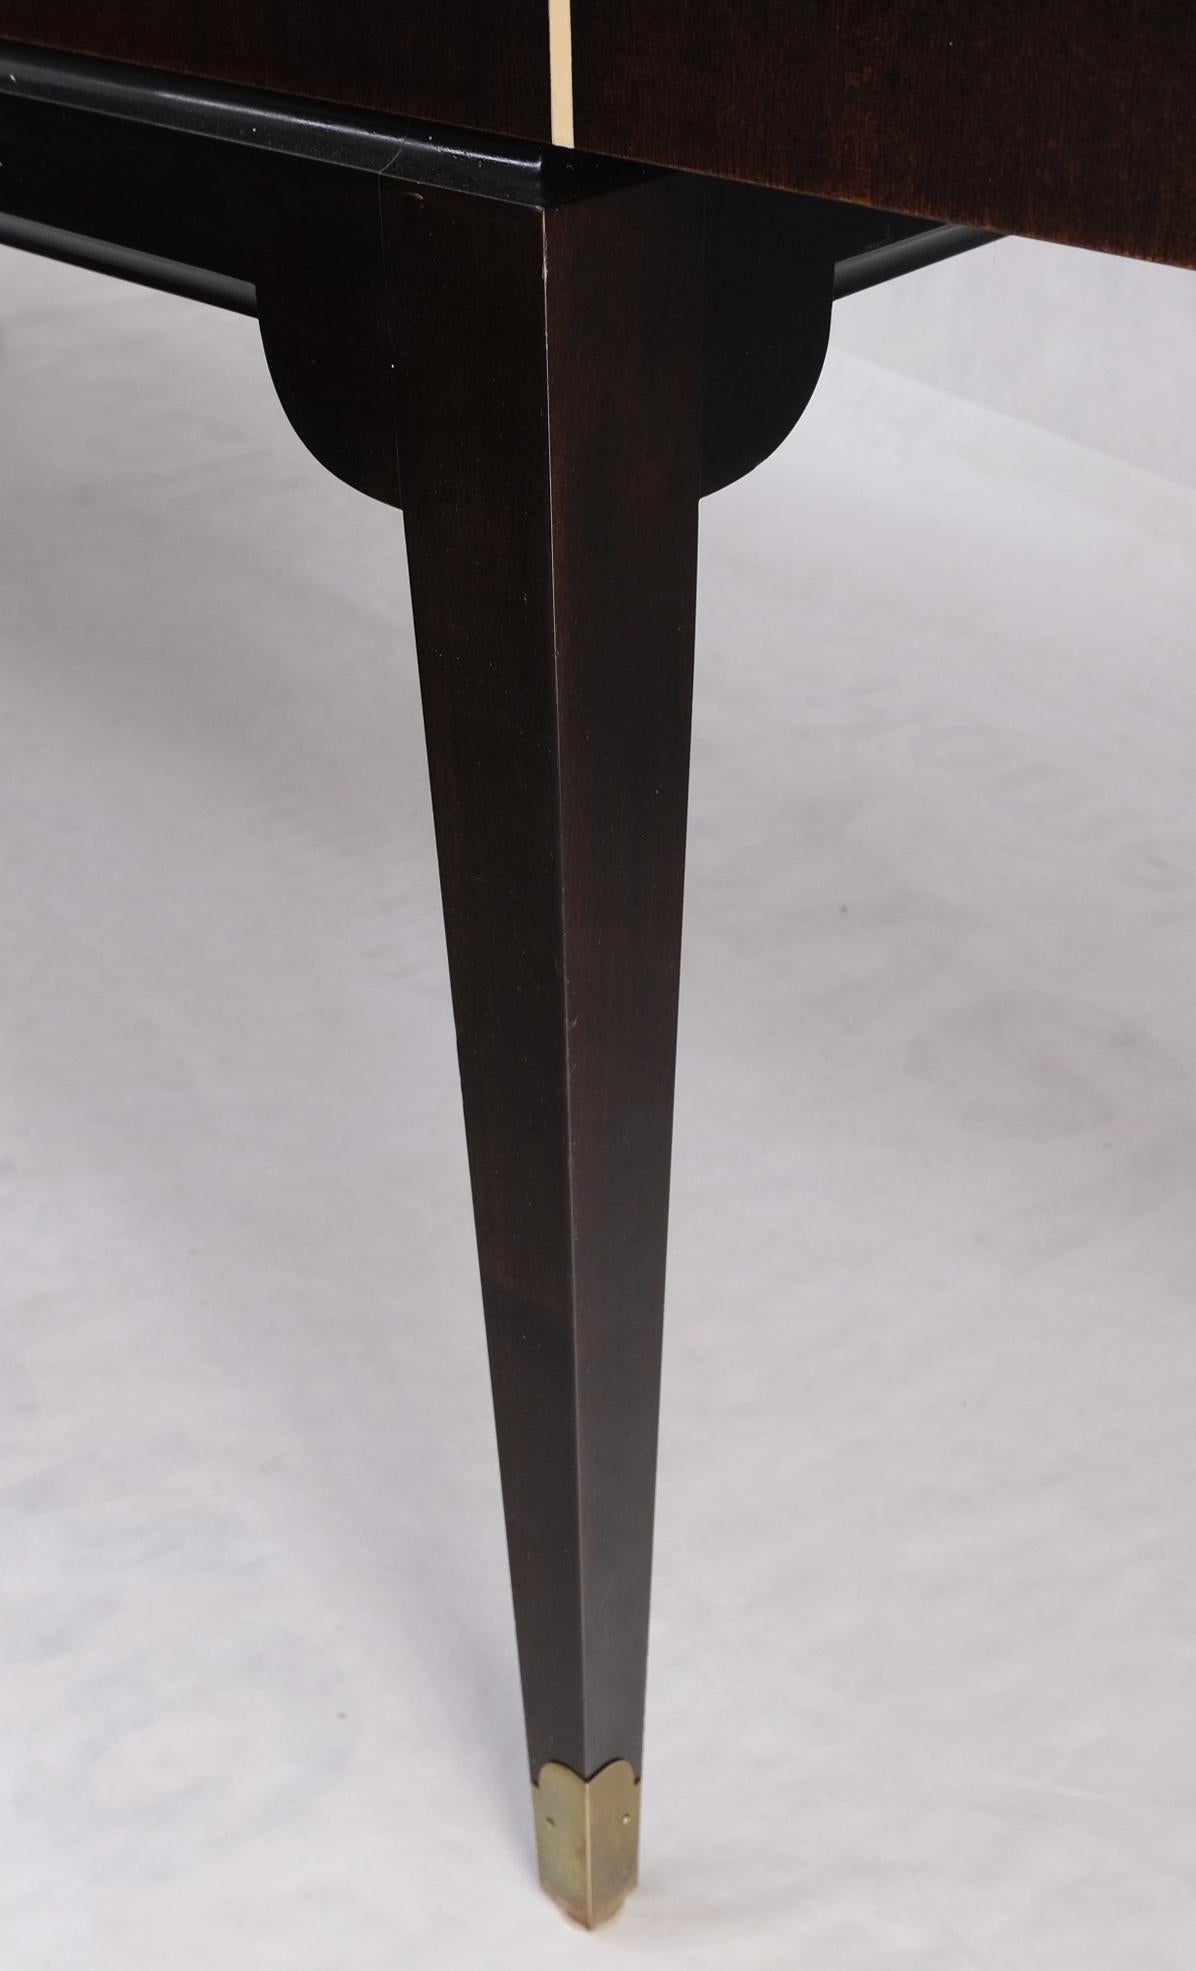 Large Tommi Parzinger Lacquered Mahogany Brass Feet Tapered Legs Dining Table In Good Condition For Sale In Rockaway, NJ